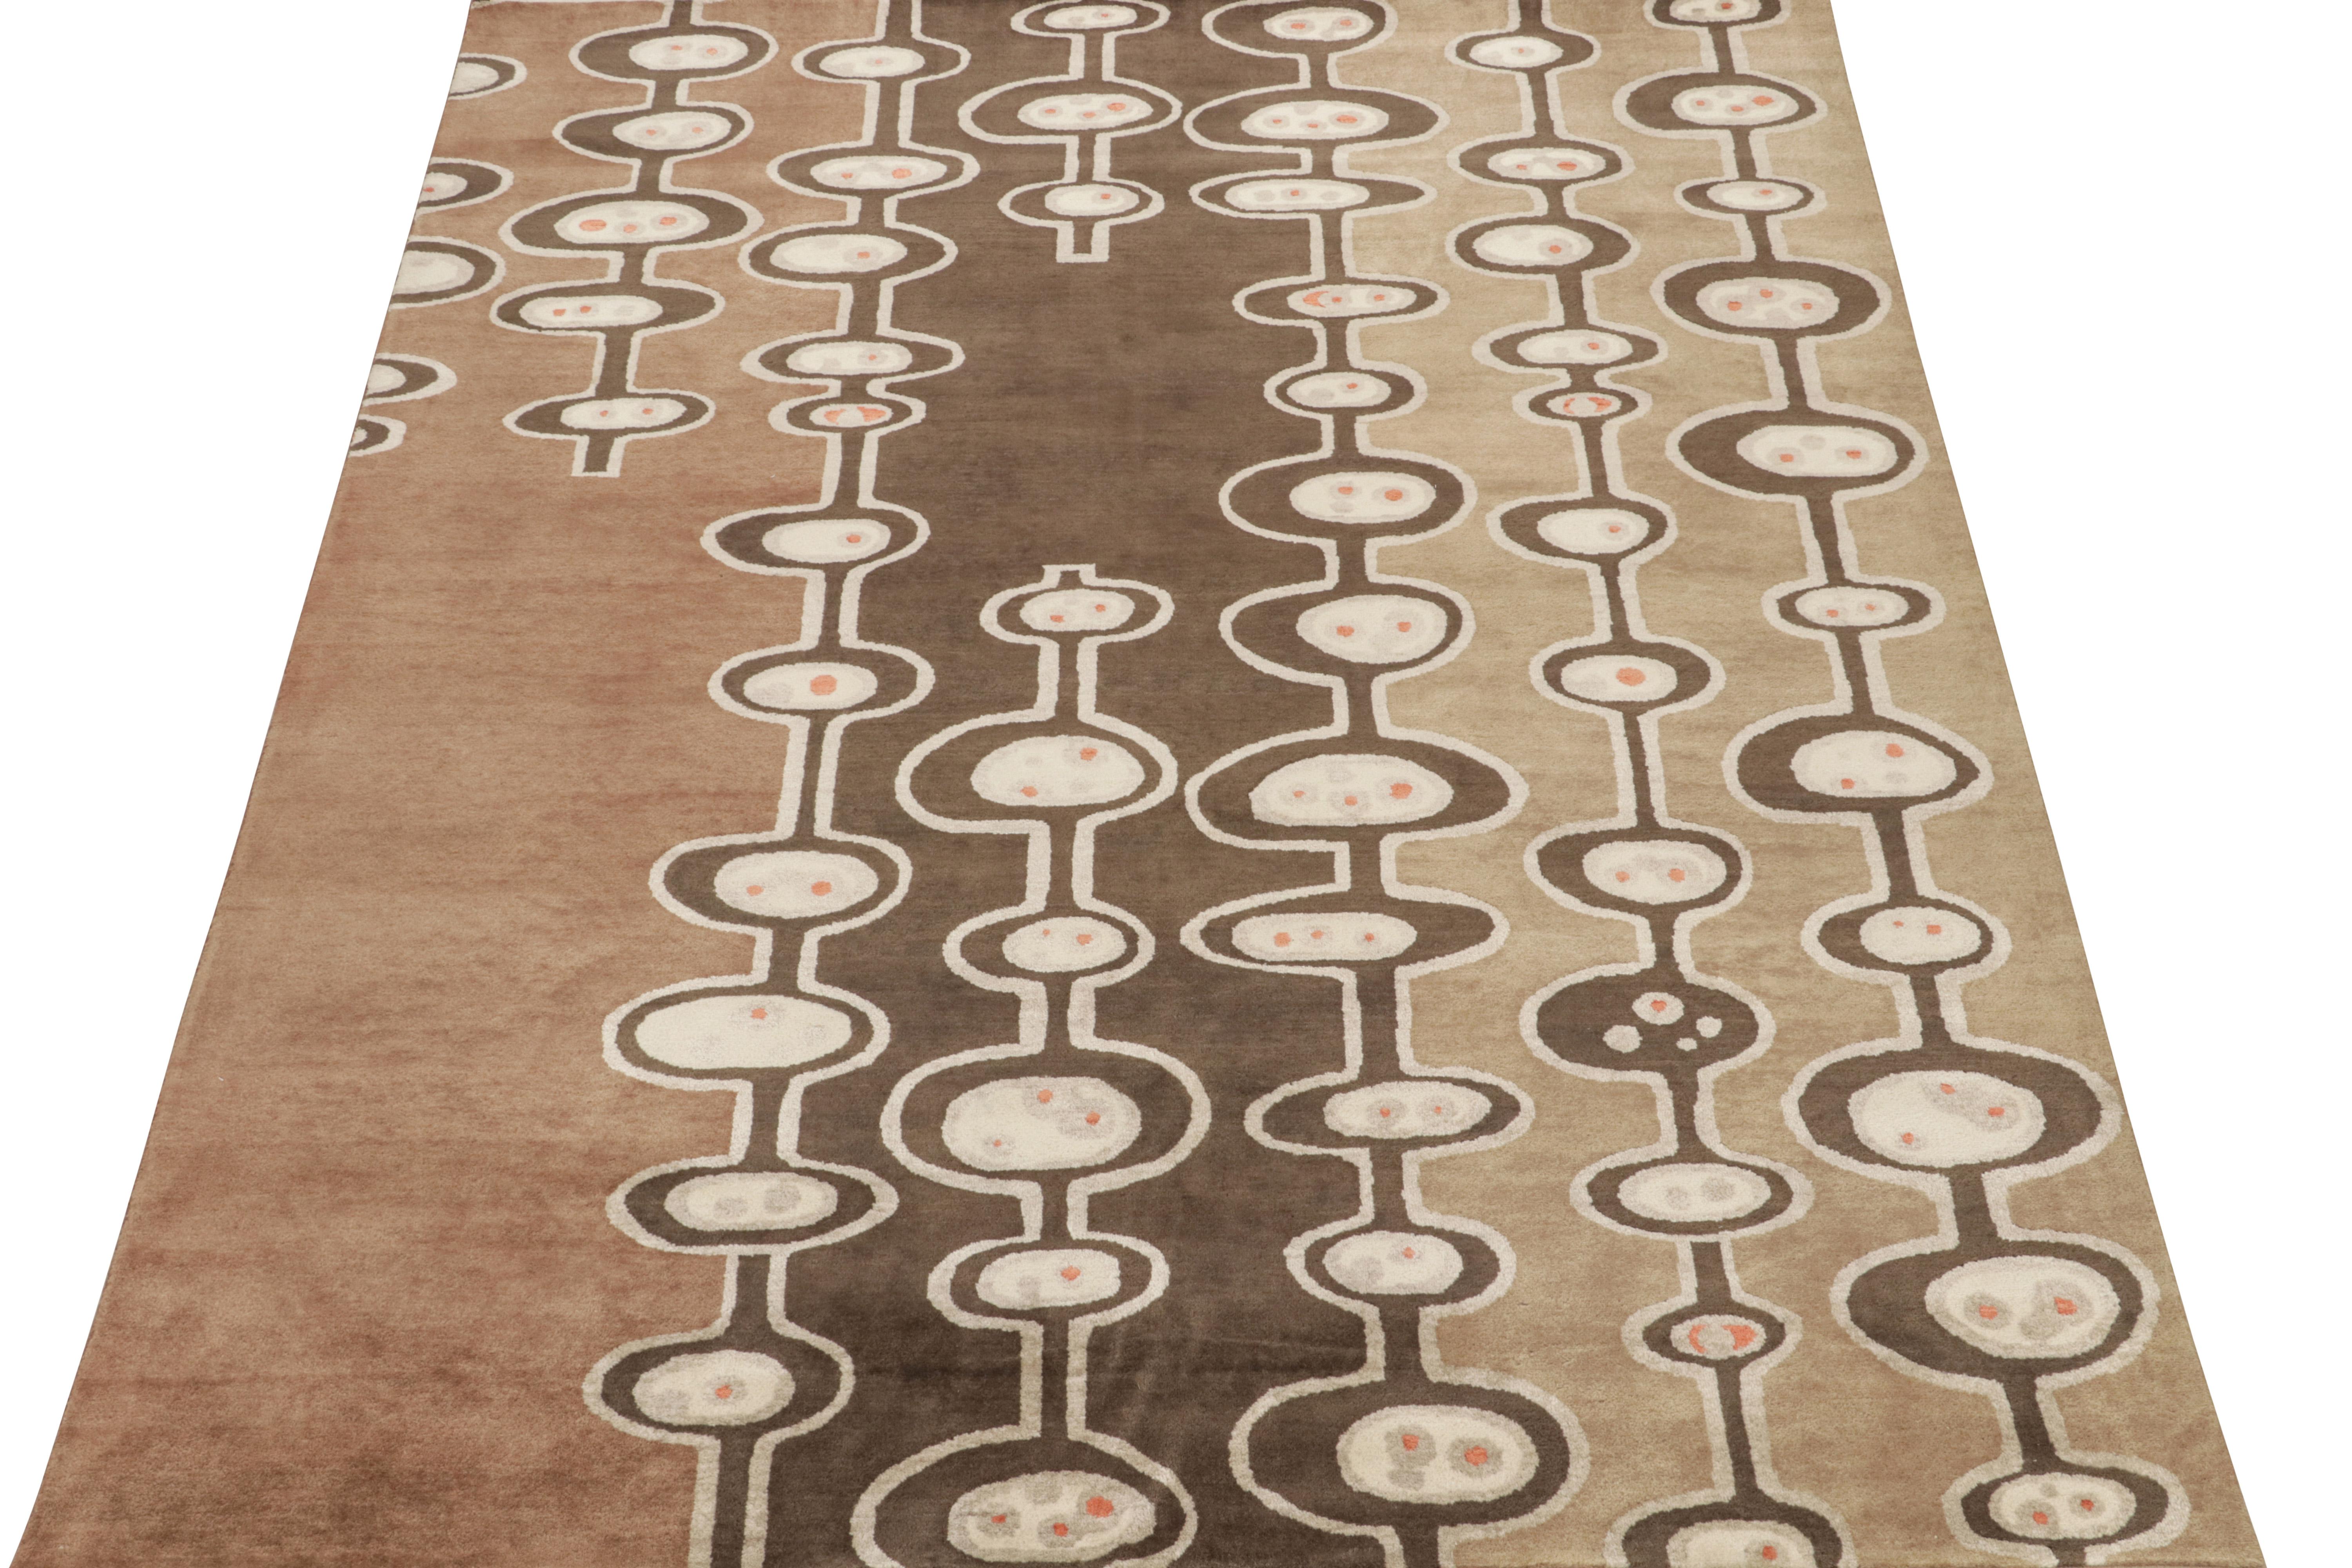 This modern 8x10 rug is an exciting new addition to the Mid-Century Modern rug collection by Rug & Kilim. Hand-knotted in wool, cotton and silk, it’s a bold take on 1950s postmodern aesthetics never-before seen in this quality. 

This design by